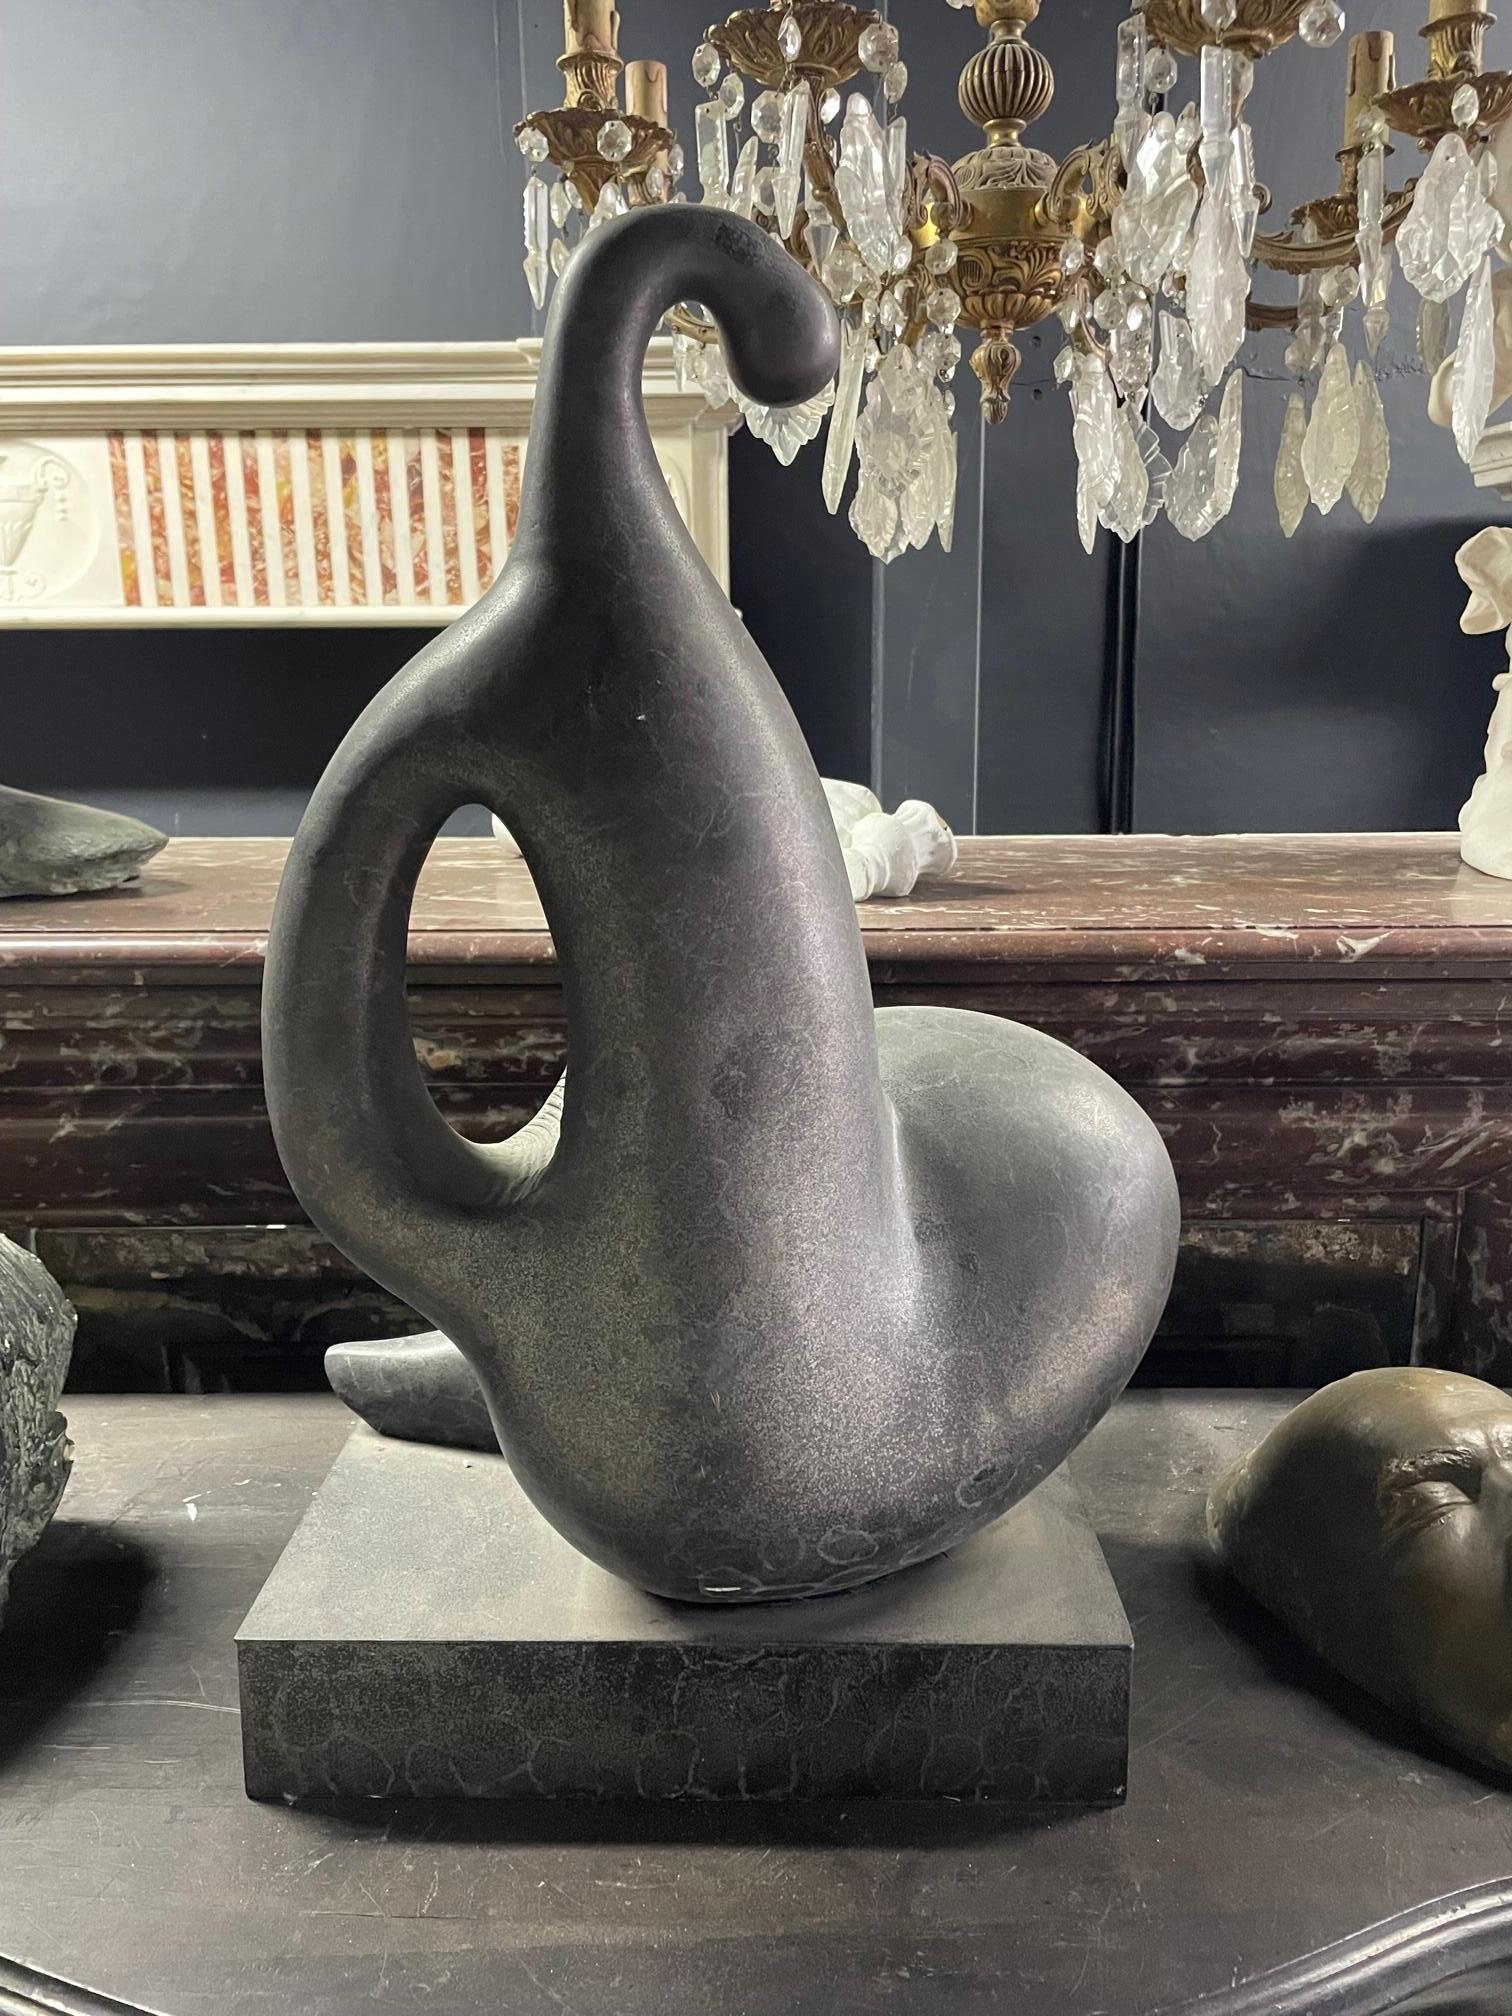 A fantastic piece of abstract art in the form of a bronze sculpture.

With sharp casting in the form of a shell motif and figurine and with a great verdi gris patina.